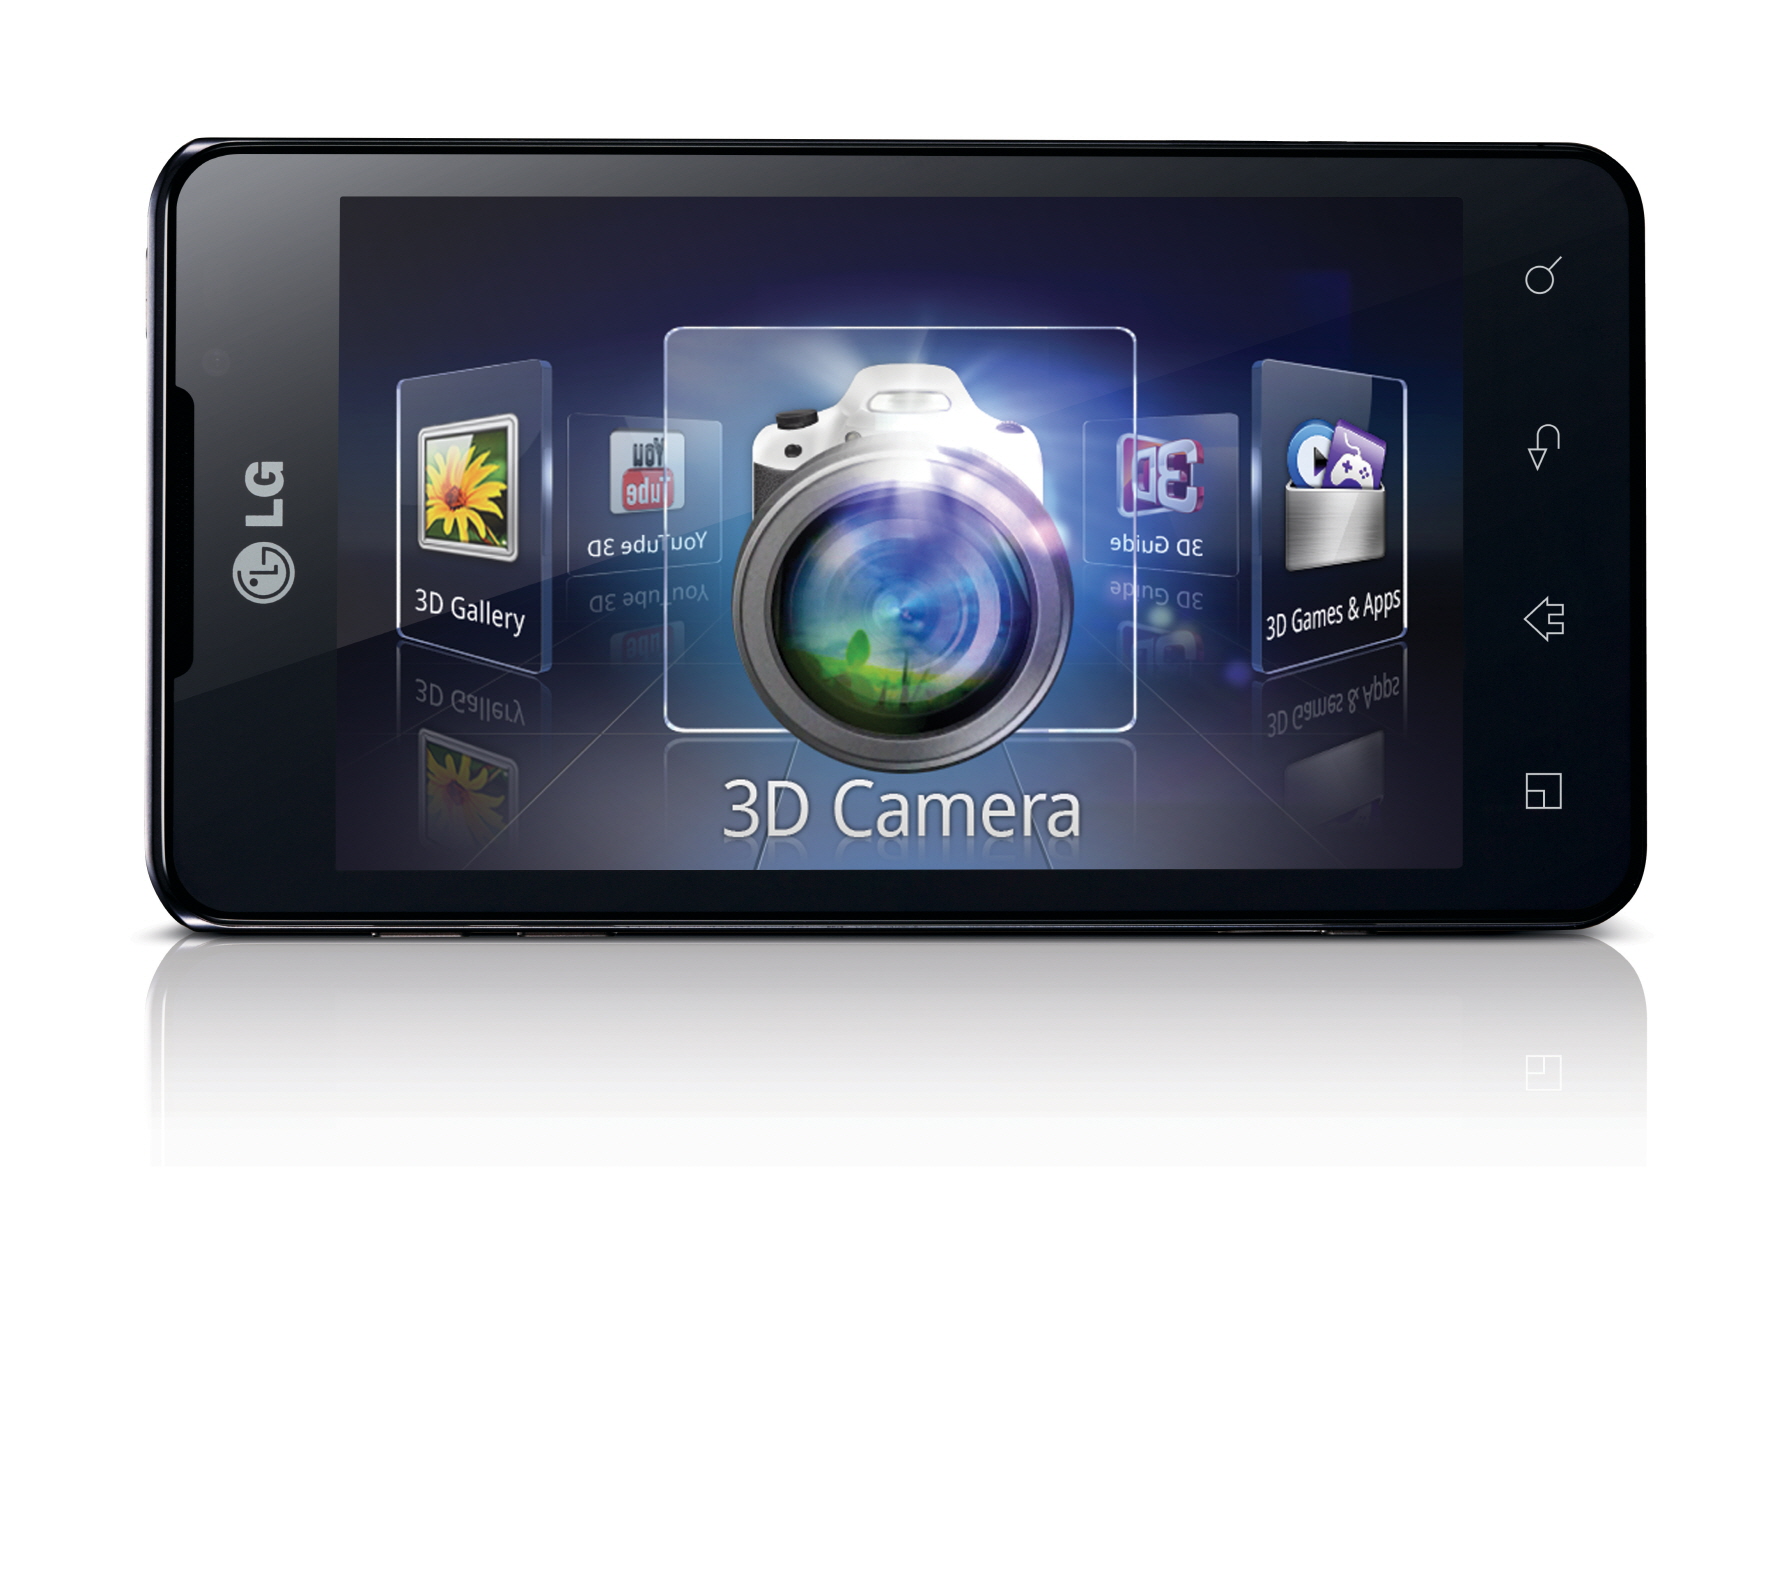 3D application icons including the 3D Camera, 3D Gallery and 3D Games & Apps are displayed on the LG Optimus 3D Max’s screen